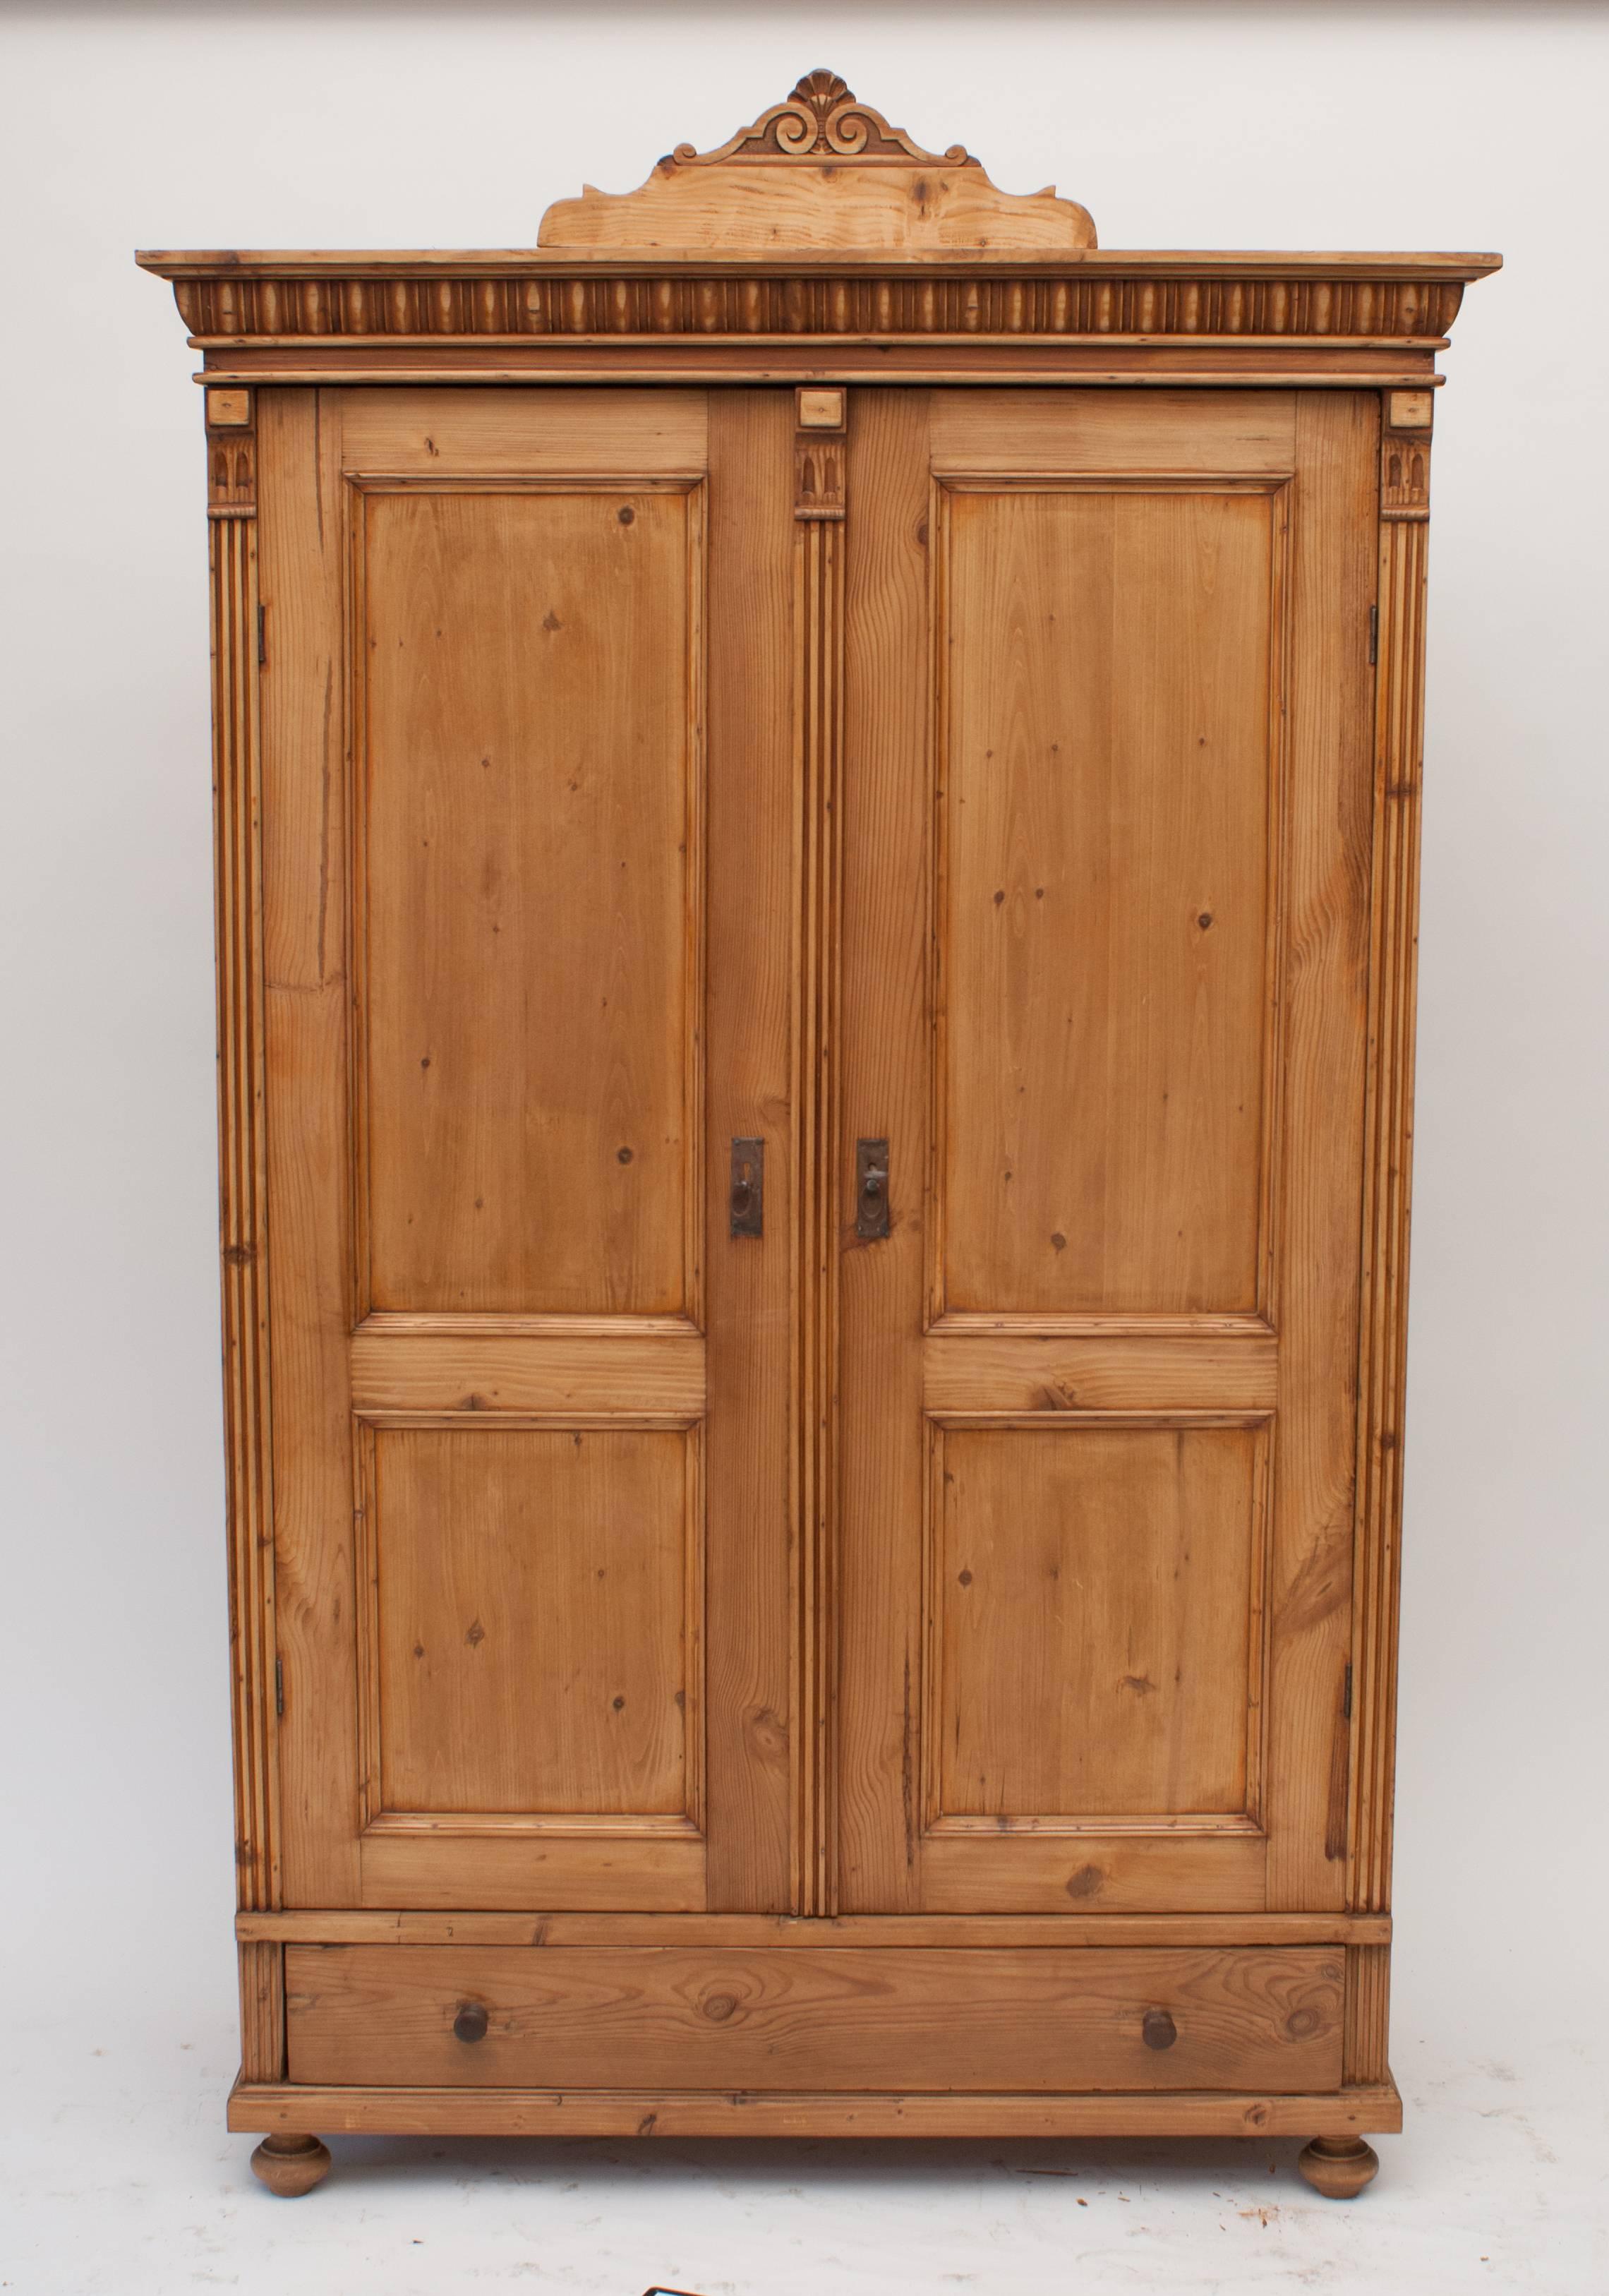 A beautiful small pine two door armoire, each door with two flat panels, flanked and separated by fluted moulding and corbels and opening to a convenient 130 degrees.  Decorative crown moulding is embellished by a removable hand carved crest. 